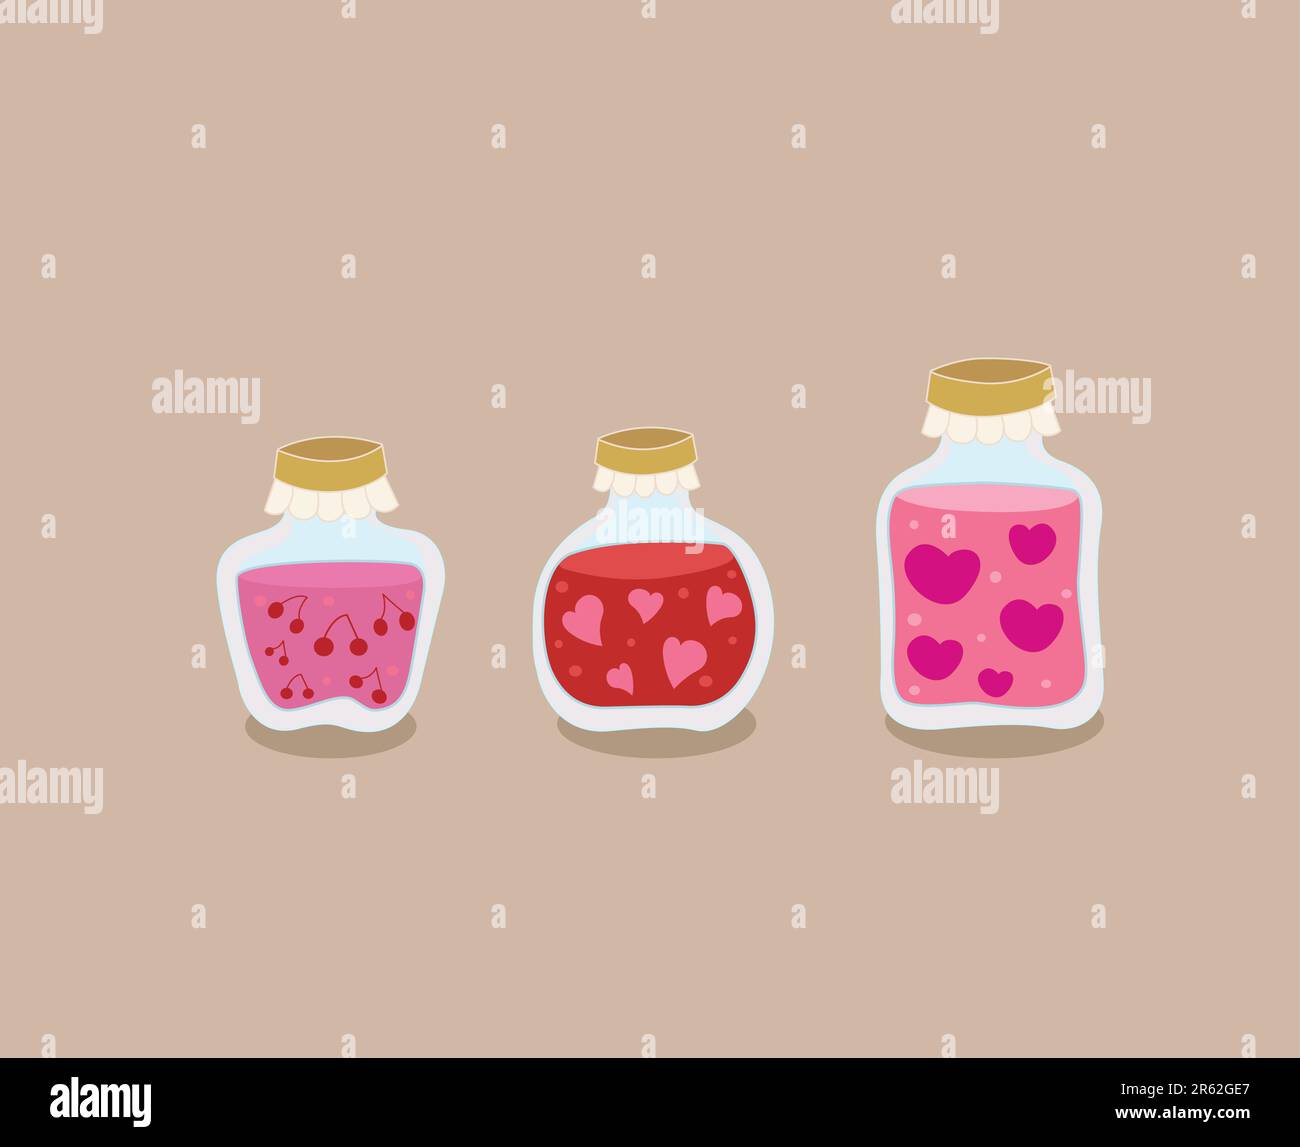 https://c8.alamy.com/comp/2R62GE7/canned-fruit-jam-filled-in-jars-stylized-strawberry-cherry-and-love-hearts-excelent-food-for-valentines-day-2R62GE7.jpg